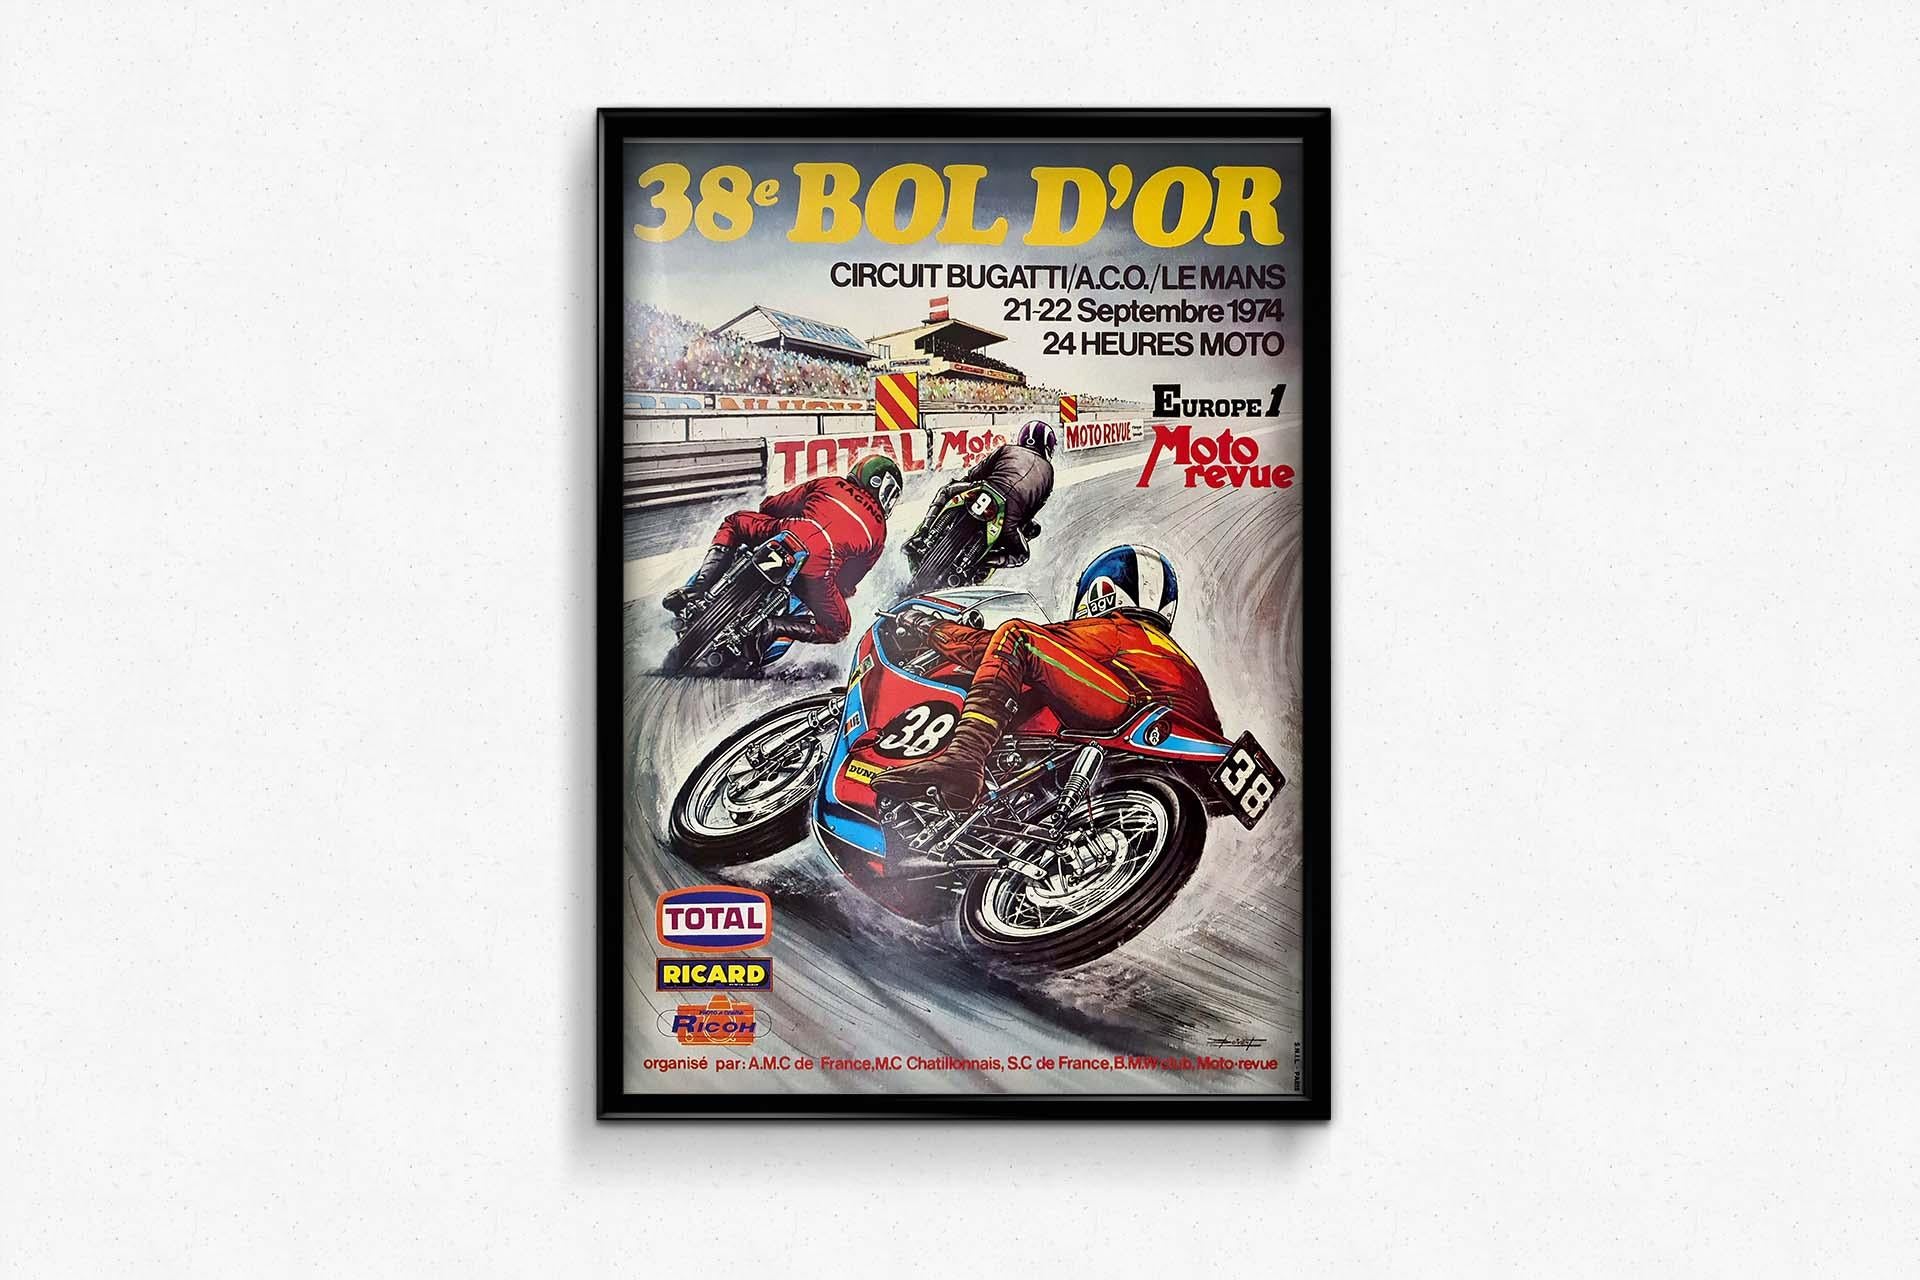 The Bol d'Or is a world-renowned endurance motorcycle race. Since its inception, this legendary competition has seen some memorable moments and impressive records. The original poster for the 38th Bol d'Or in 1974 pays tribute to this legendary